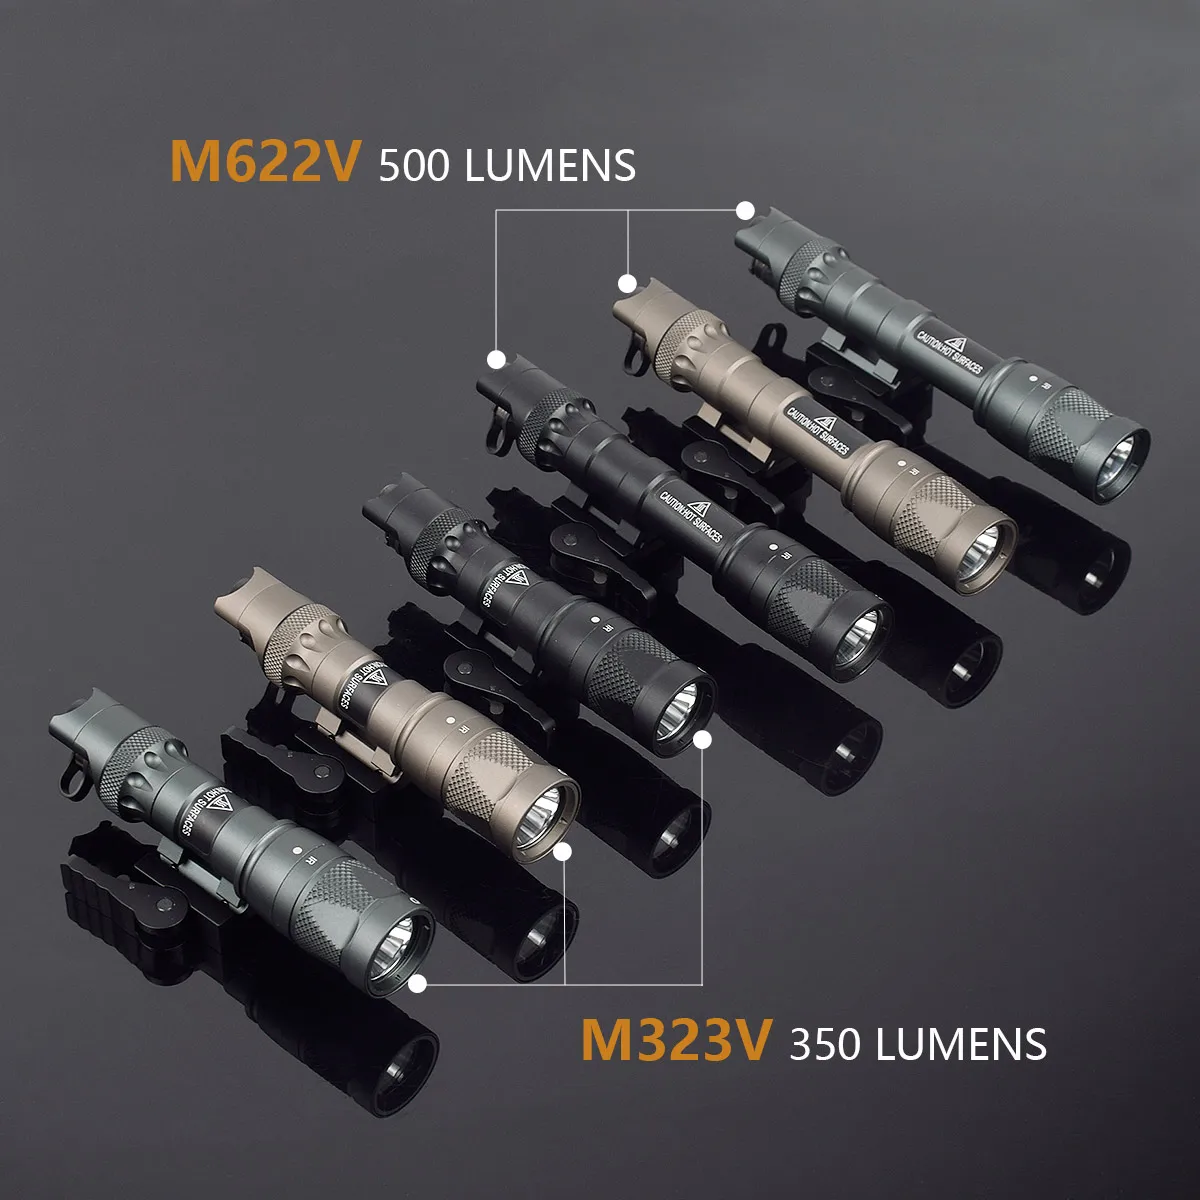 

Tactical M300 M600 M323V M622V IR Weapon Light LED Flashlight IR Infrared Output Hunting Scout Light with Remote Switch QD Mount